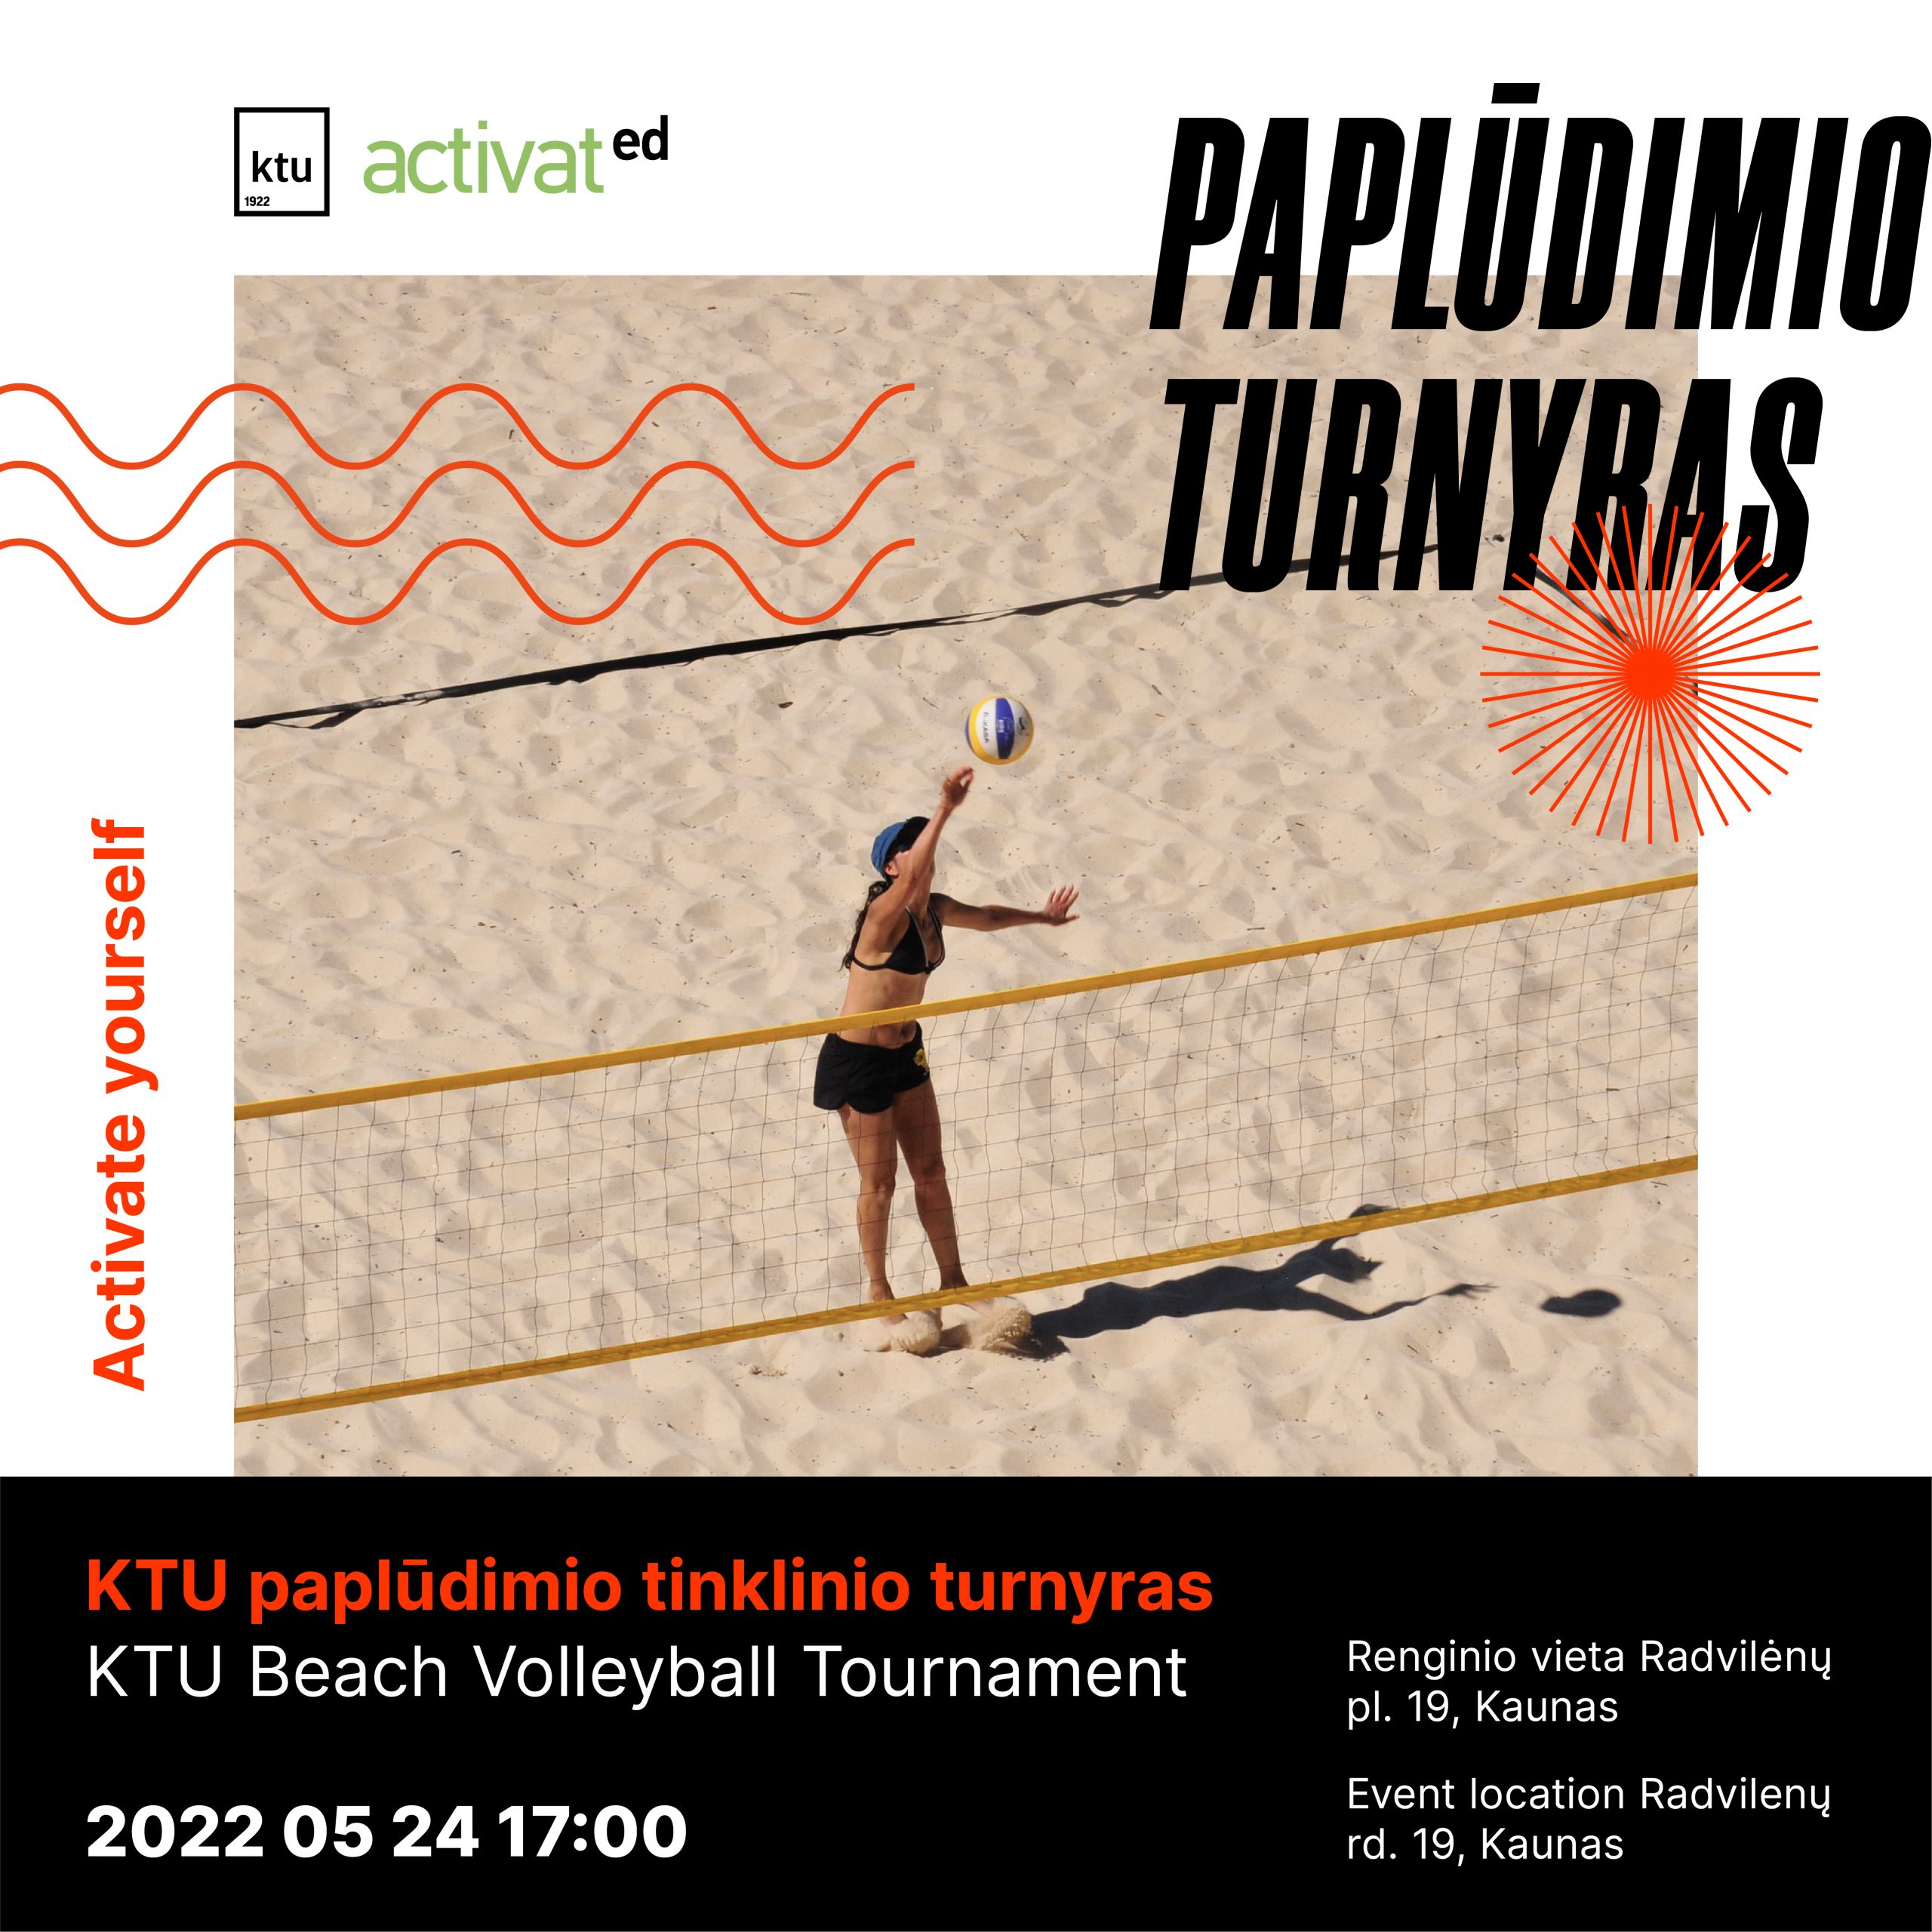 One women in bikini top playing volleyball on the beach court and written text on the right top and bottom of the image with logo on the top left corner